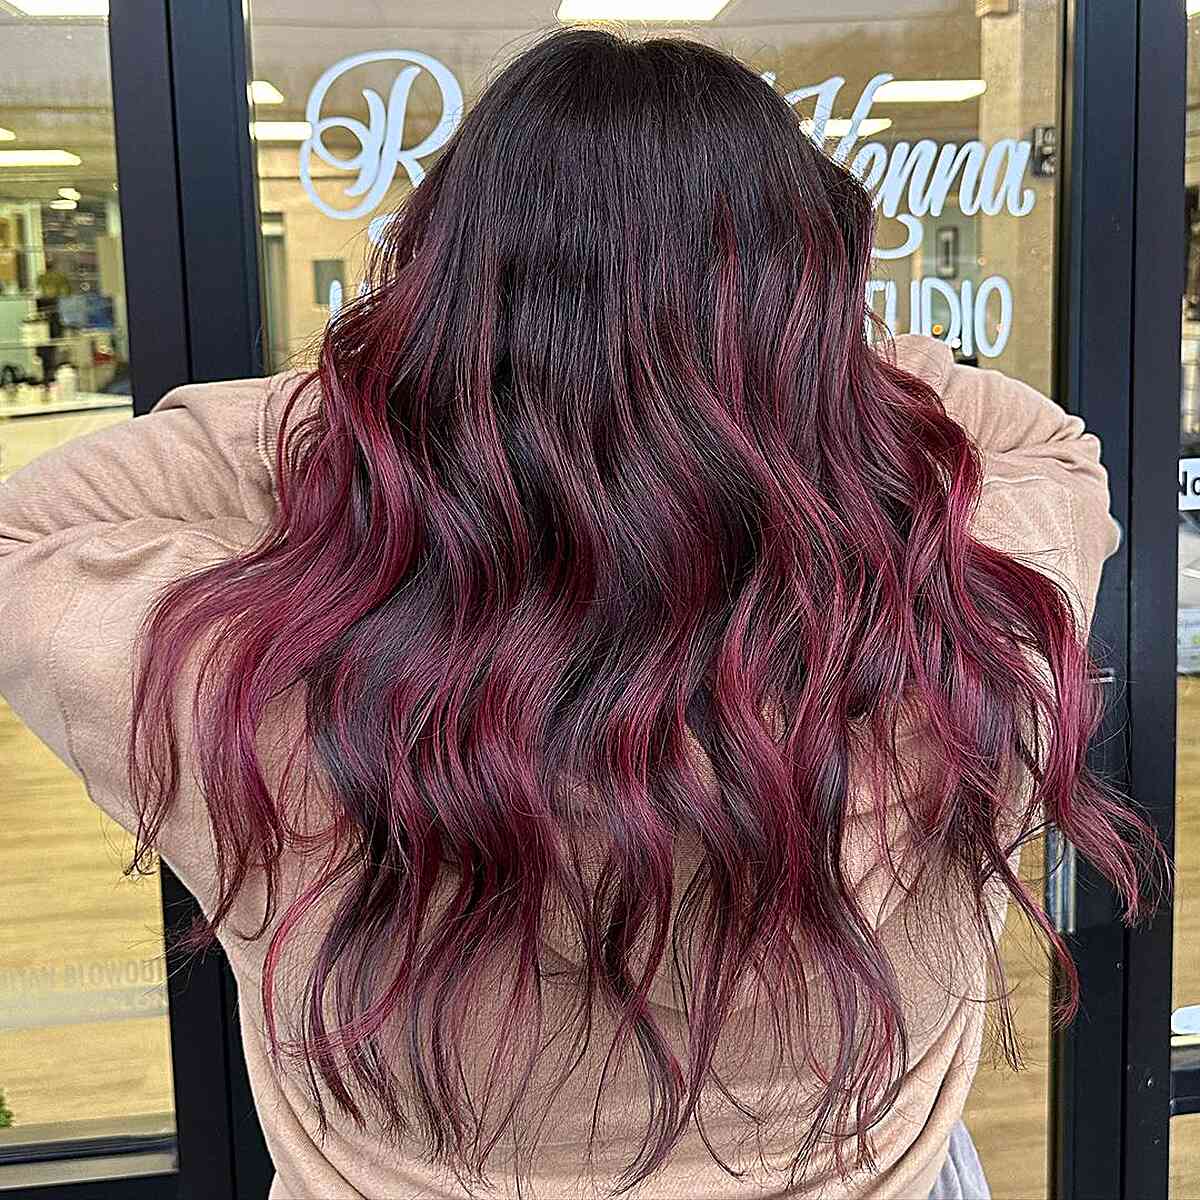 Long Wavy Black Hair with Cherry Cola Highlights